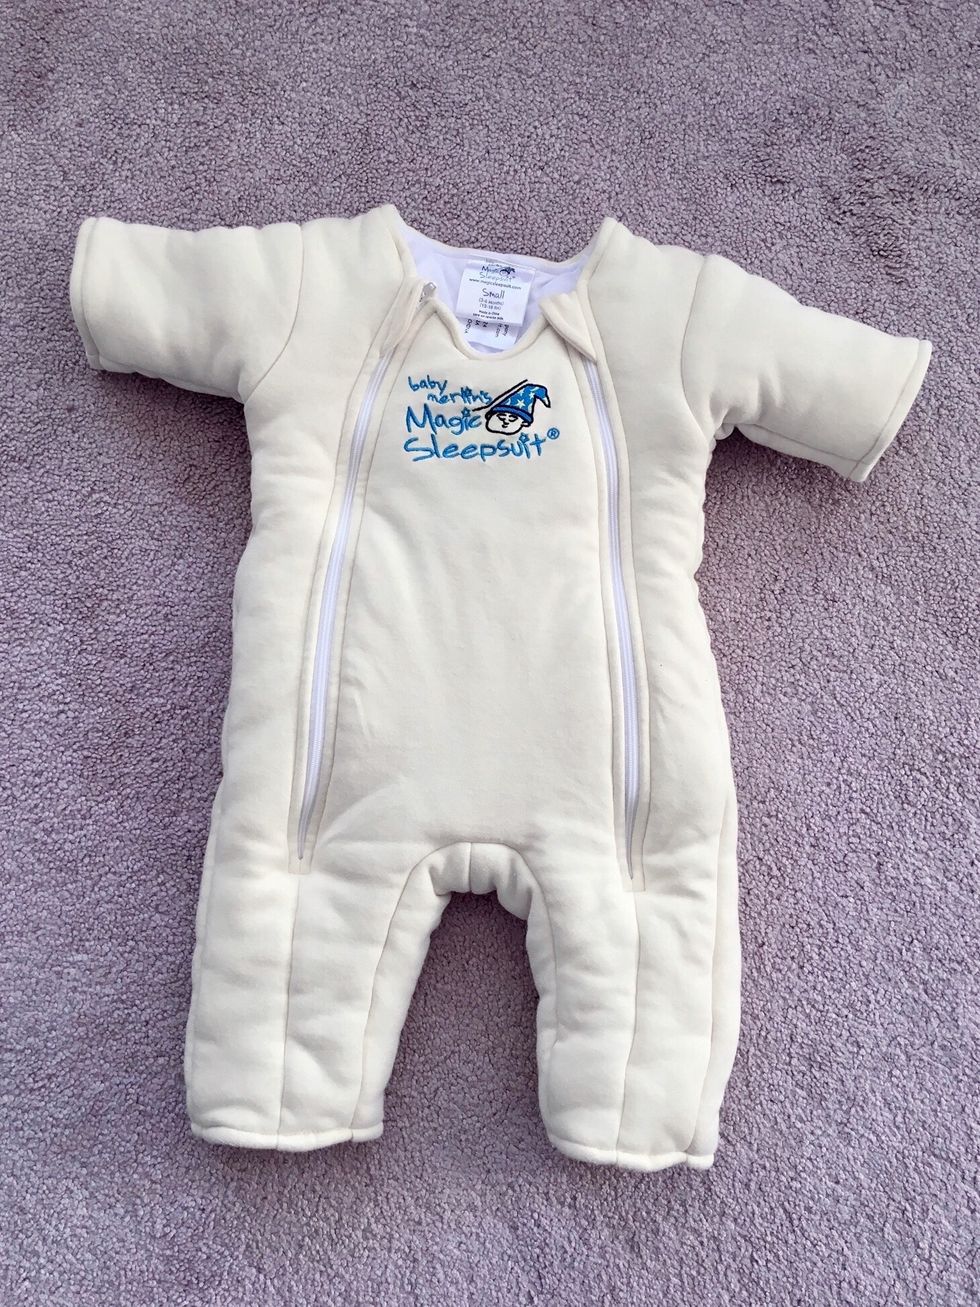 This Hero Dad Turned His Baby Daughter's Magic SleepSuit Into a Space Suit